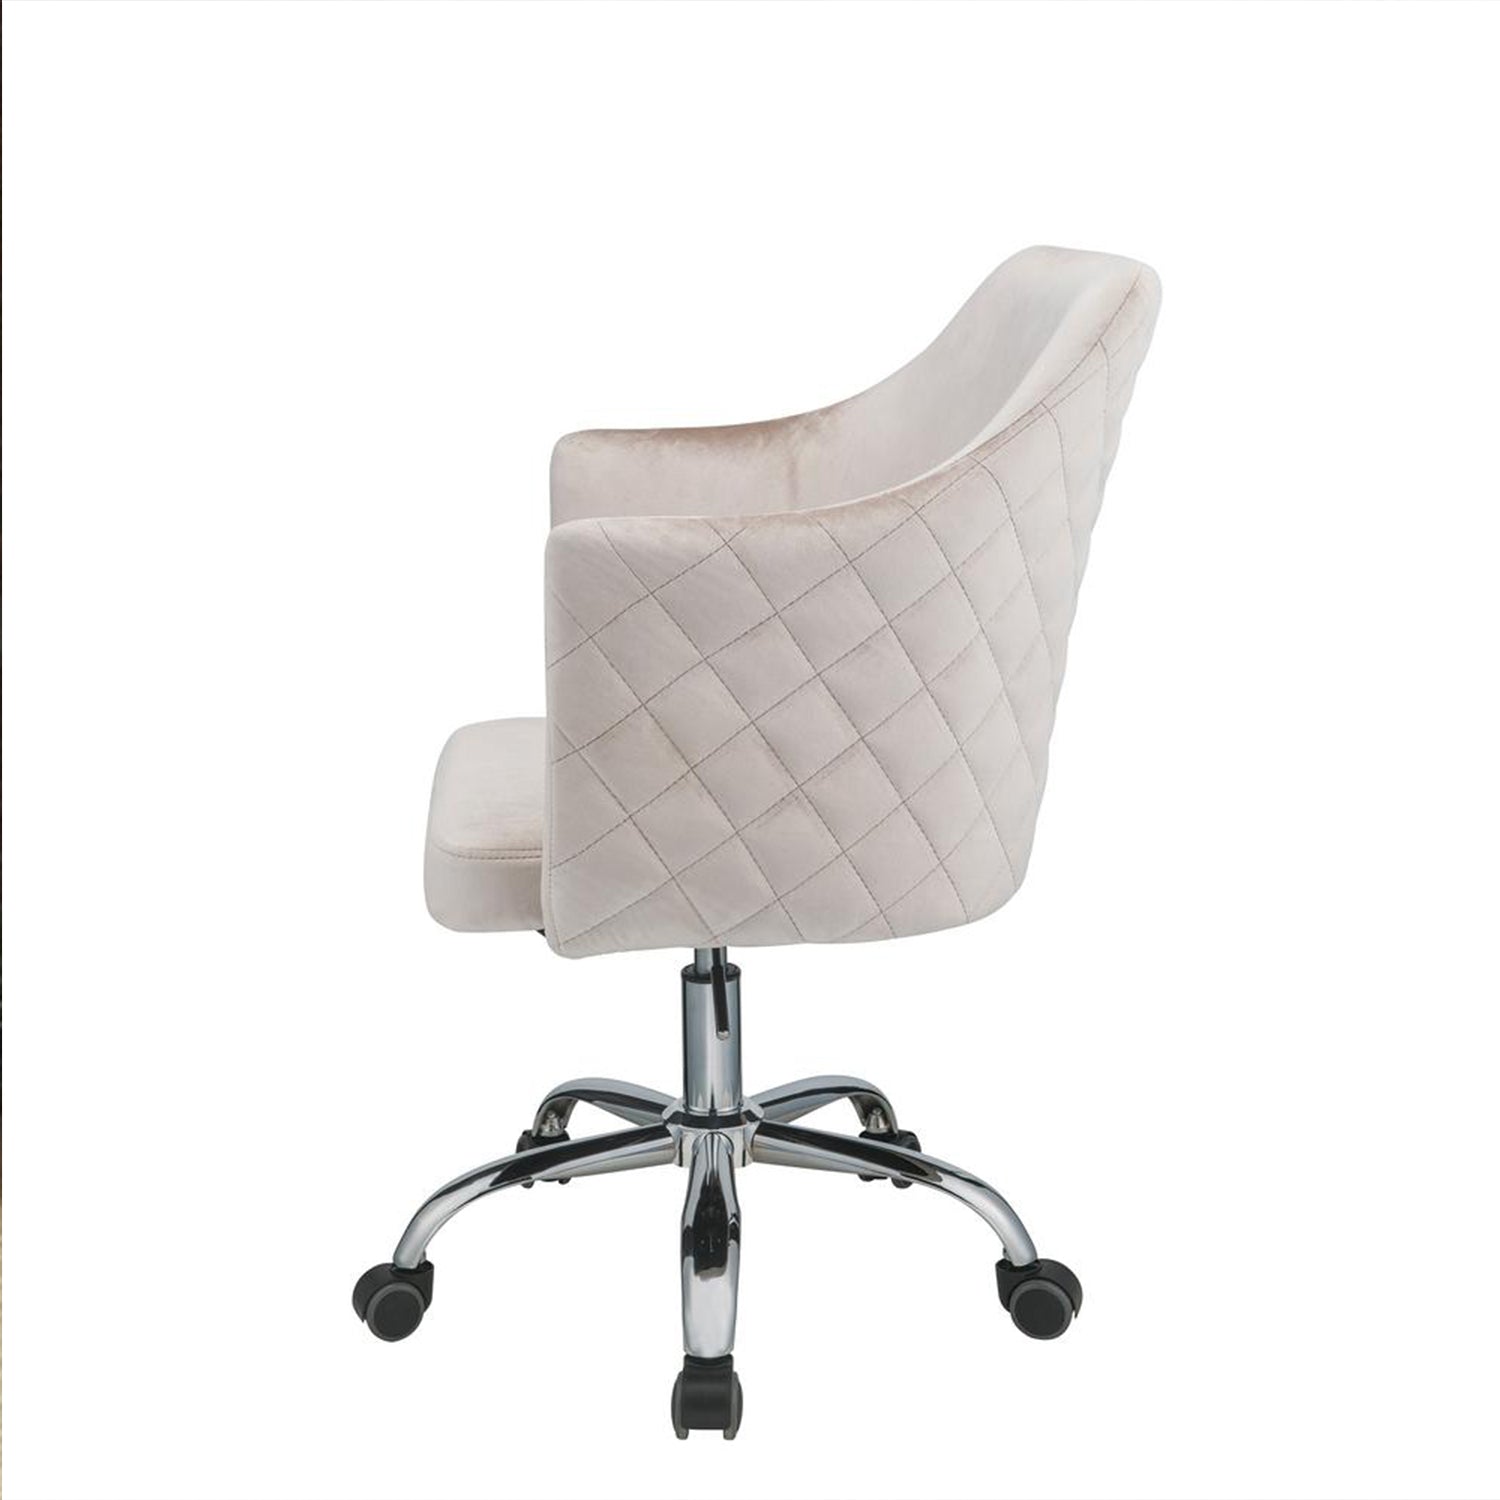 Champagne-Fabric-Seat-Swivel-Adjustable-Task-Chair-Fabric-Back-Steel-Frame-Office-Chairs